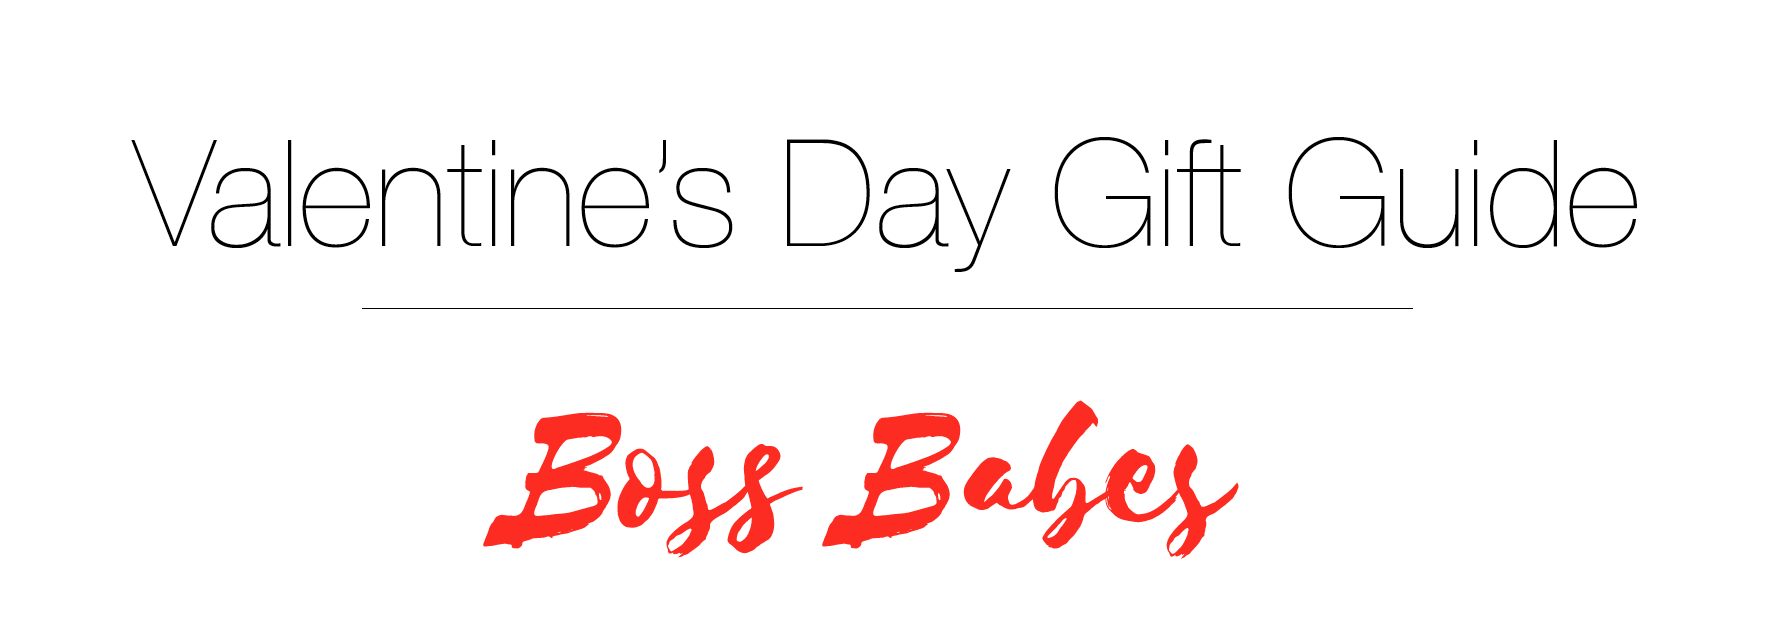 SimplyAudreeKate.VDay.BossBabes.png